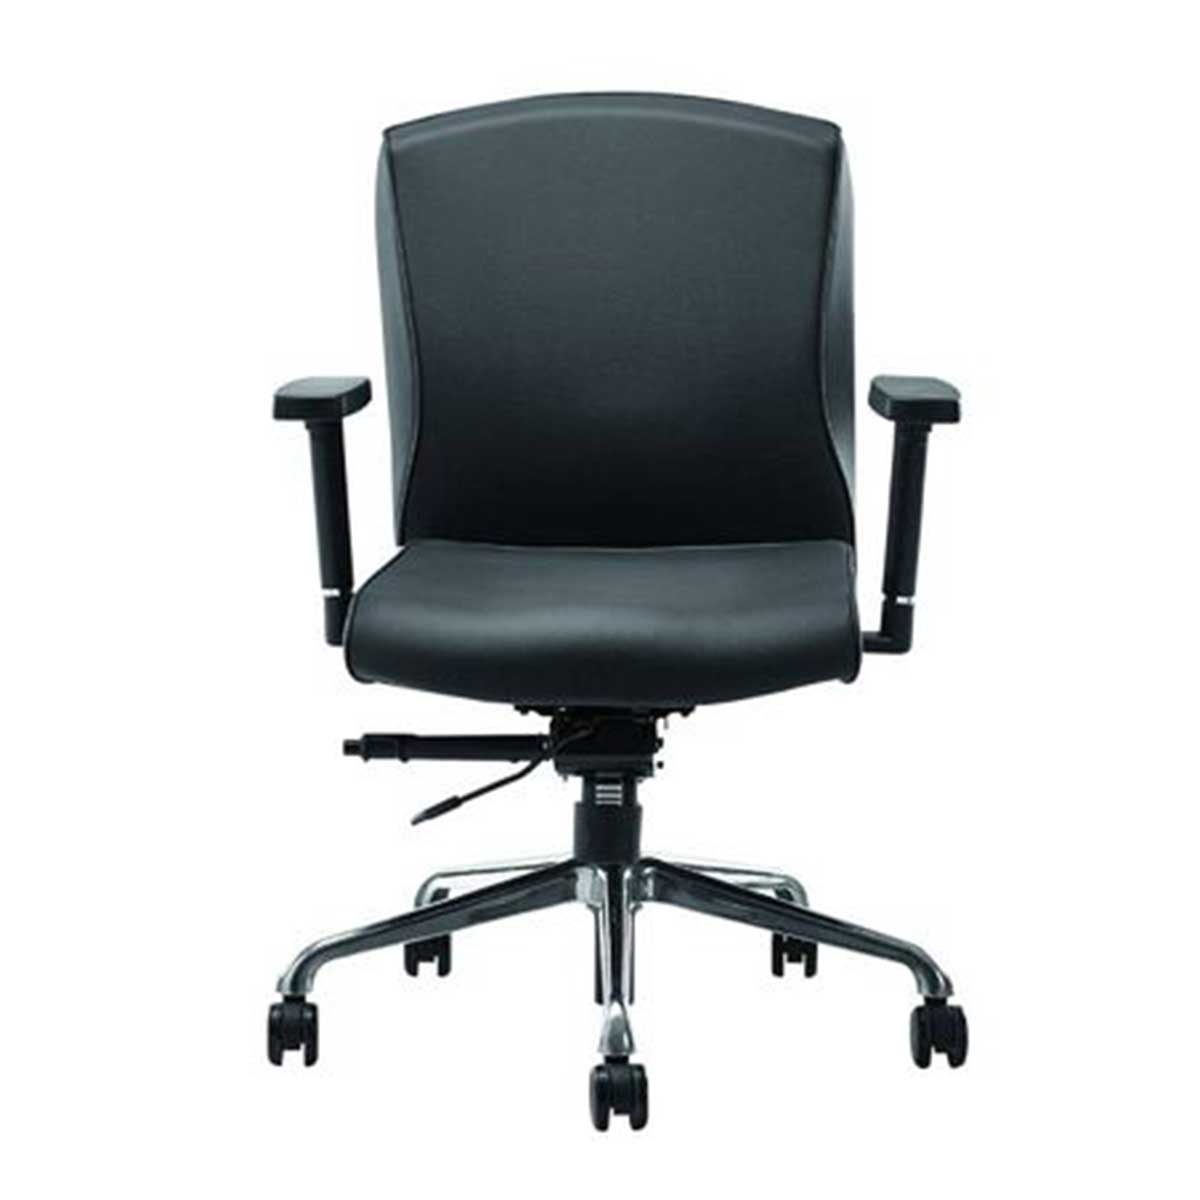 Low Back Office Chair Manufacturers, Suppliers in Faridabad